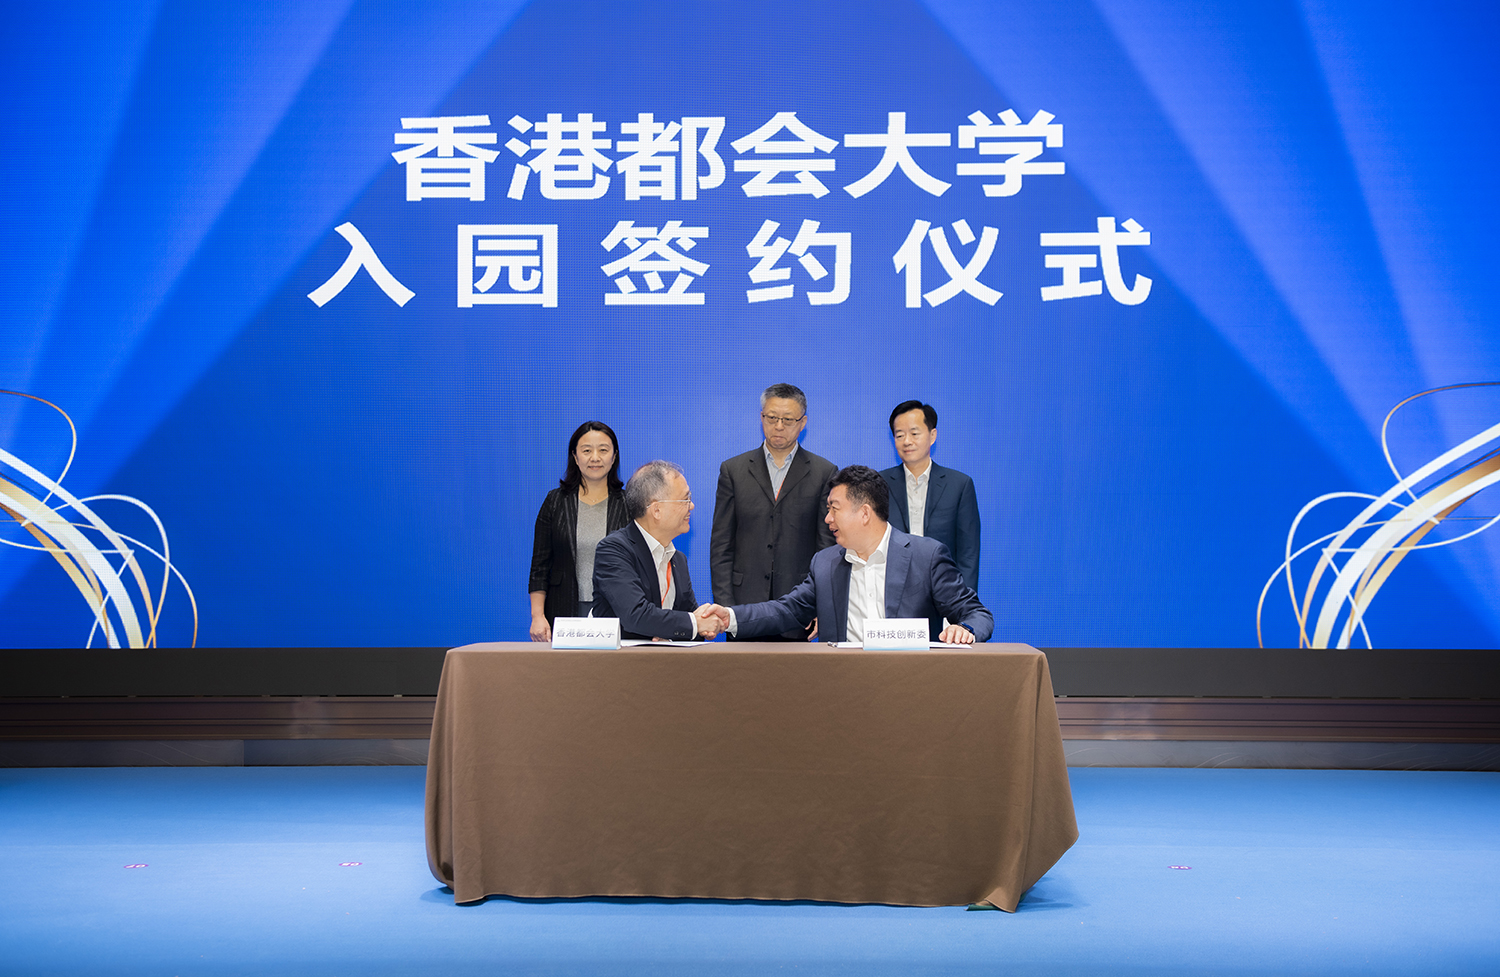 Deputy Director Lou Yanfeng of the Science, Technology and Innovation Commission of Shenzhen Municipality (front row, right) and HKMU President Prof. Paul Lam Kwan-sing (front row, left) express gratitude by shaking hands after signing the Admission Agreement.